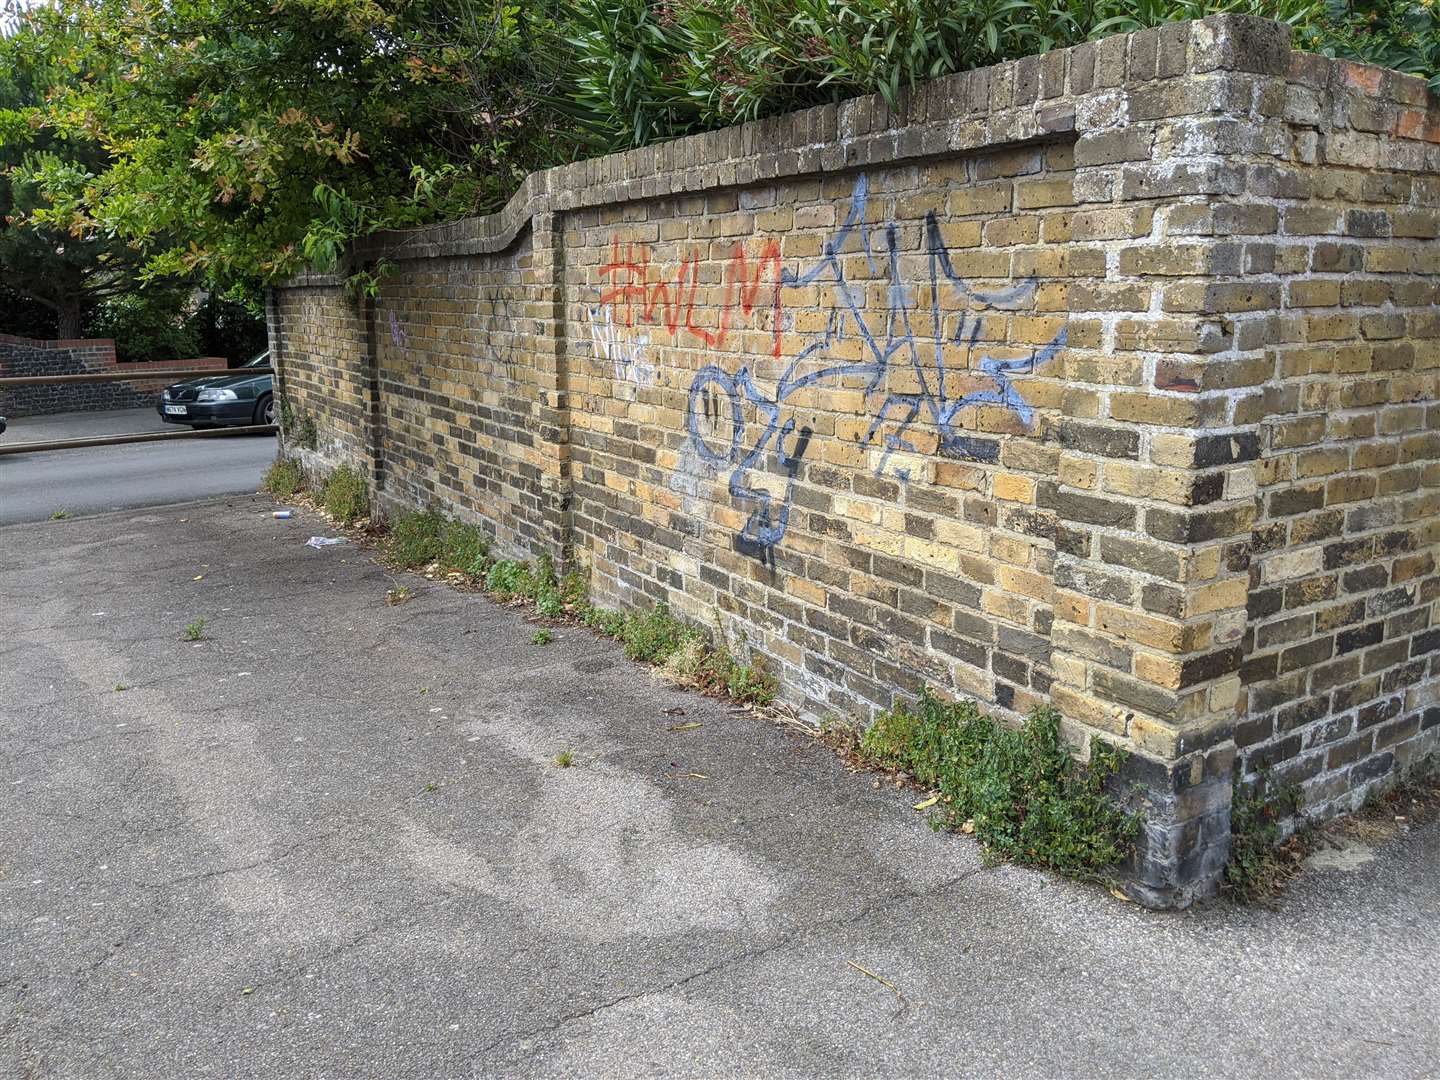 Racist graffiti in Margate is being investigated by police